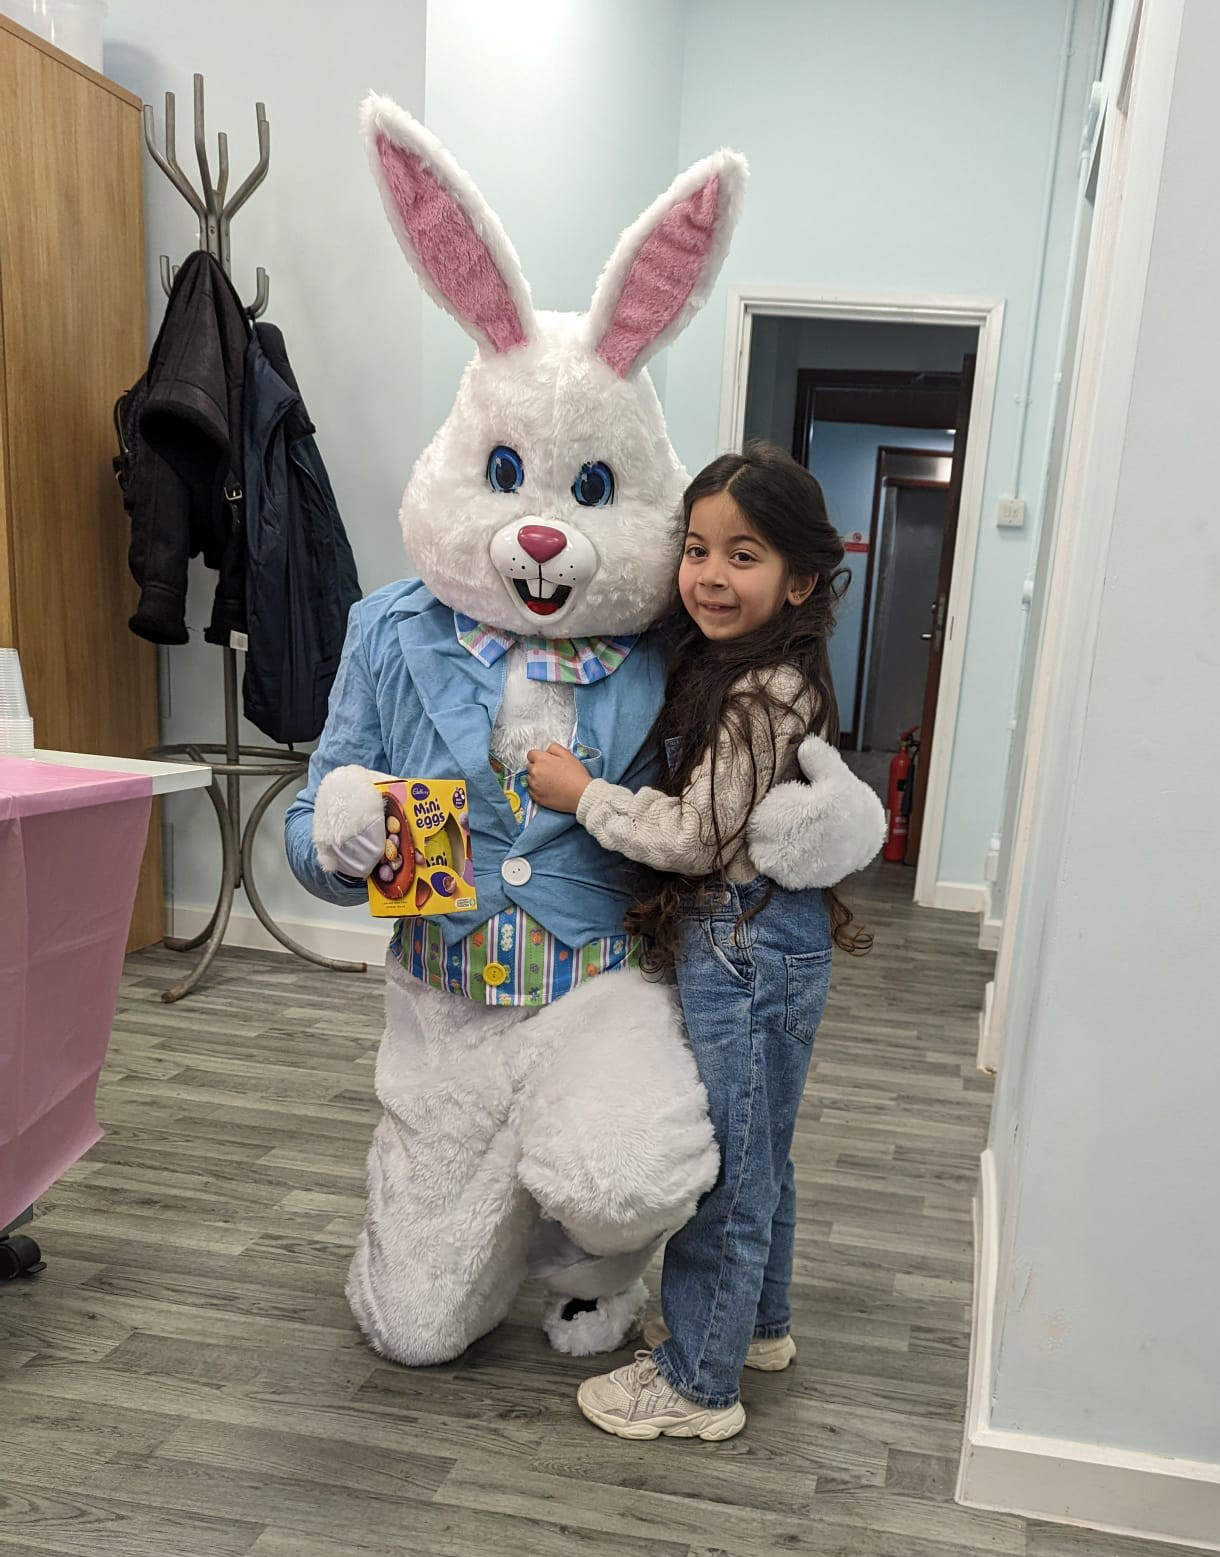 The Easter Bunny hand delivers an Easter Egg